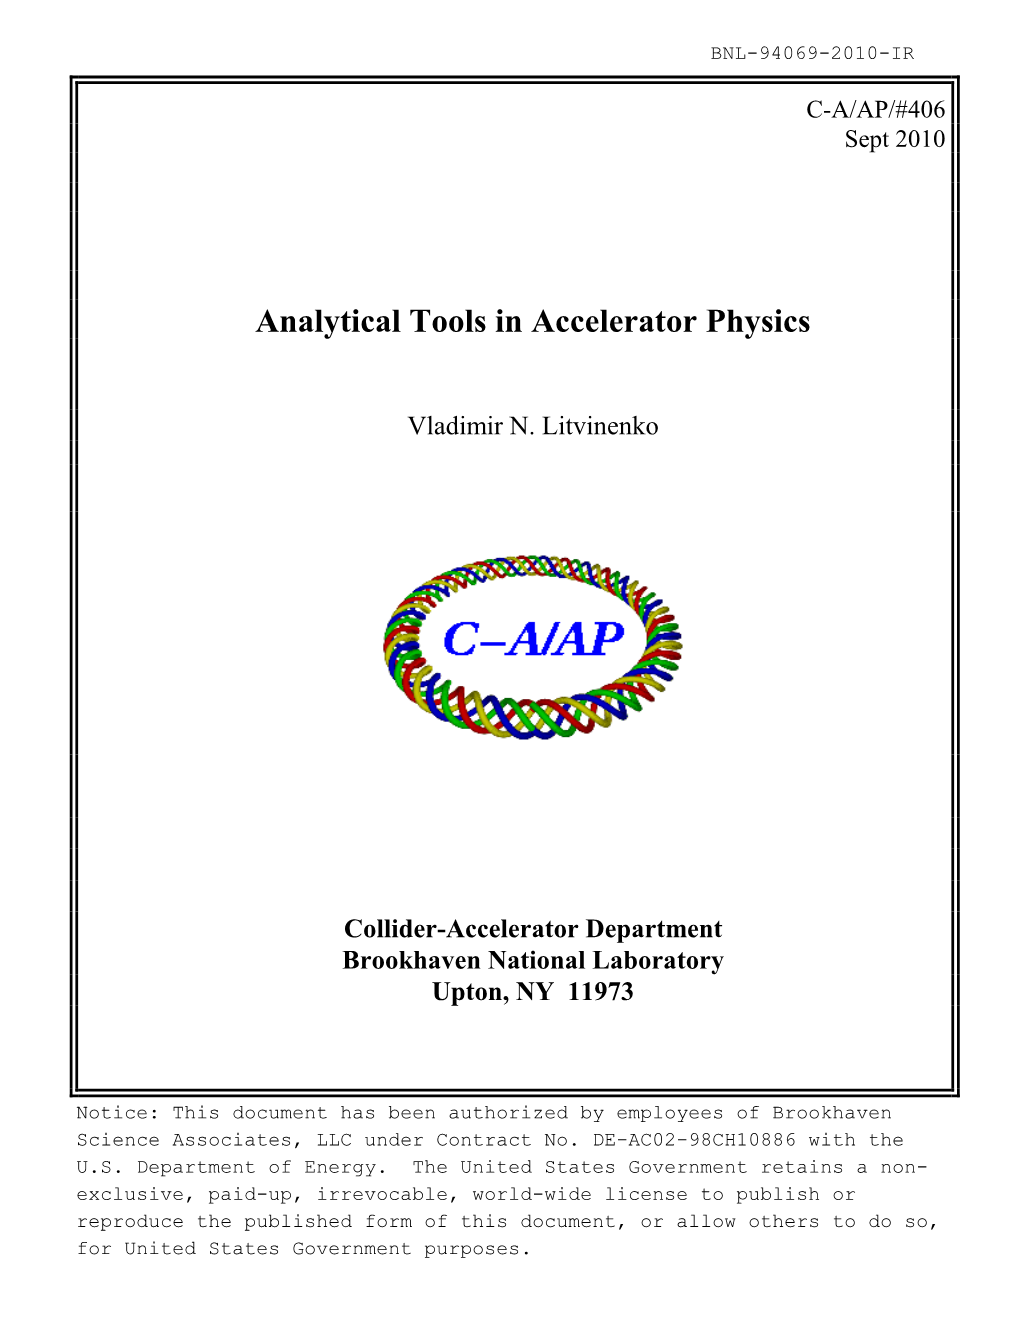 Analytical Tools in Accelerator Physics